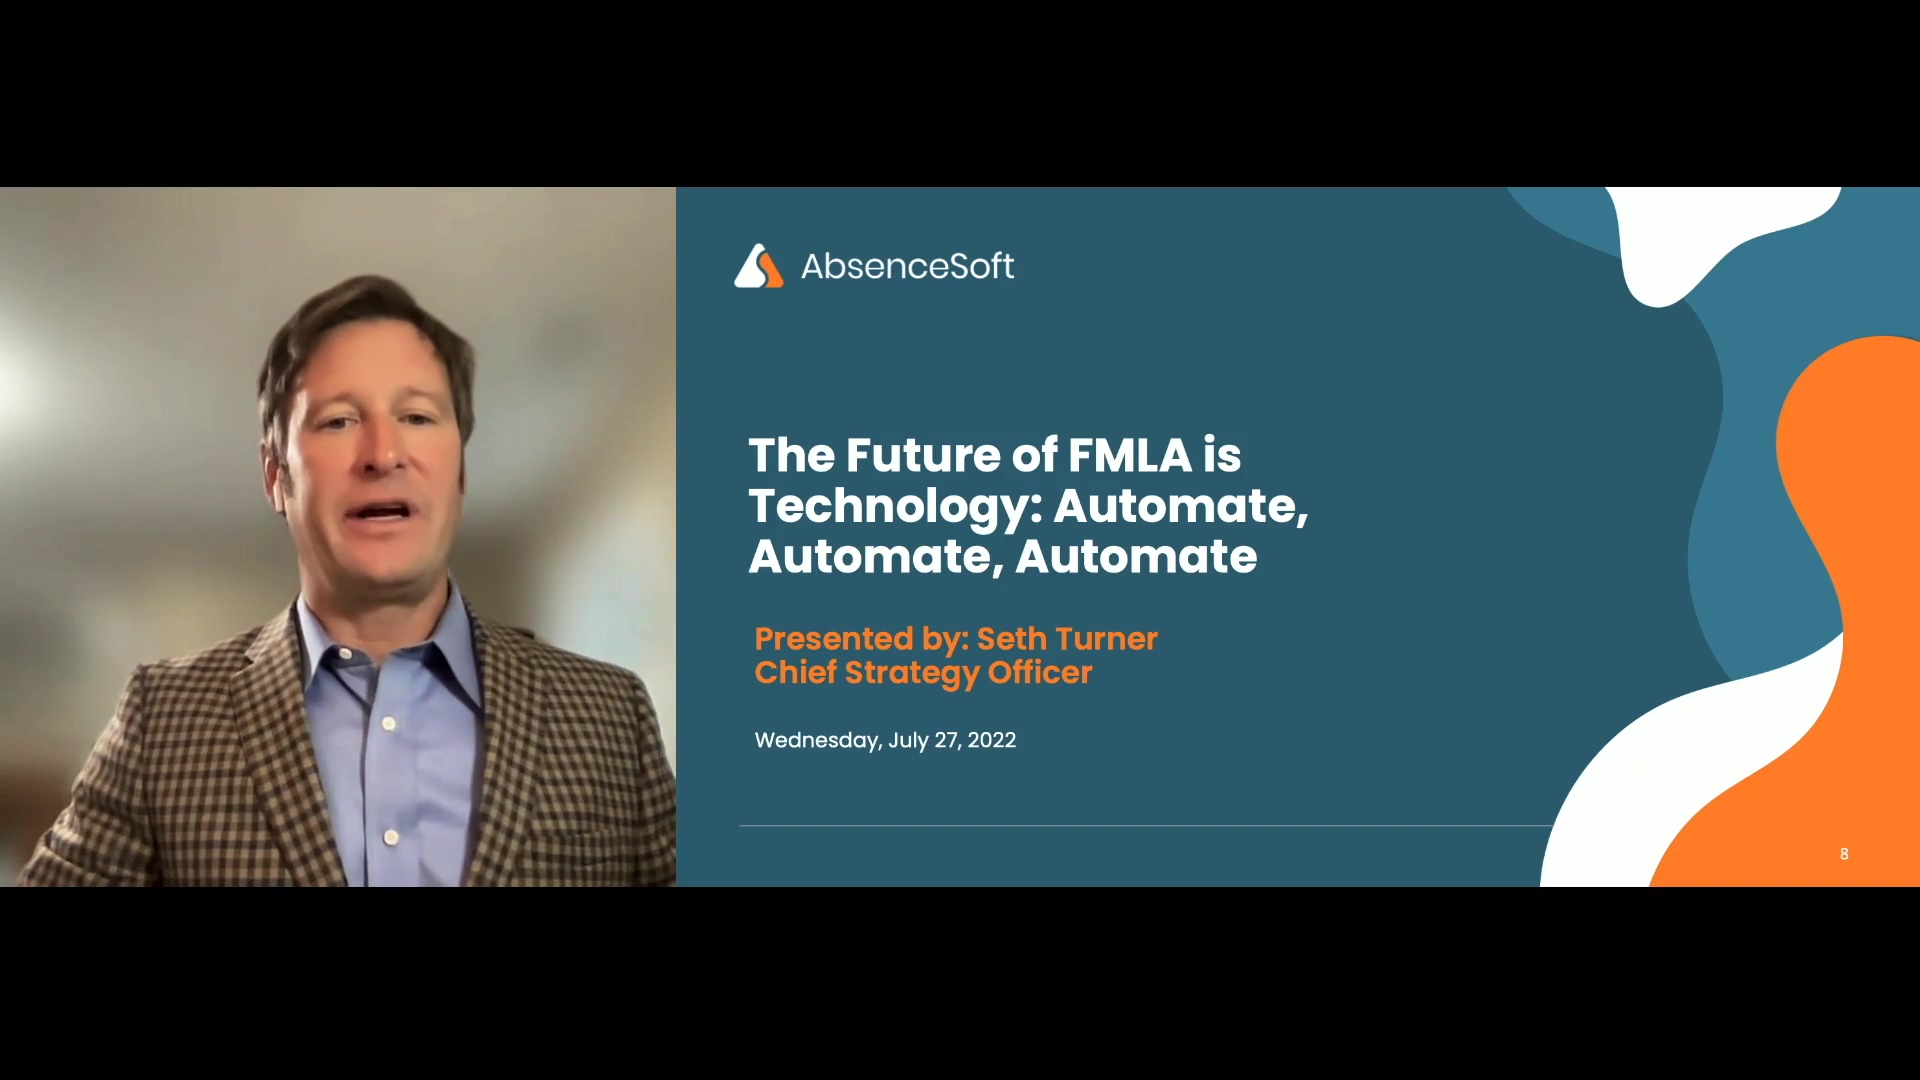 The Future of FMLA is Technology